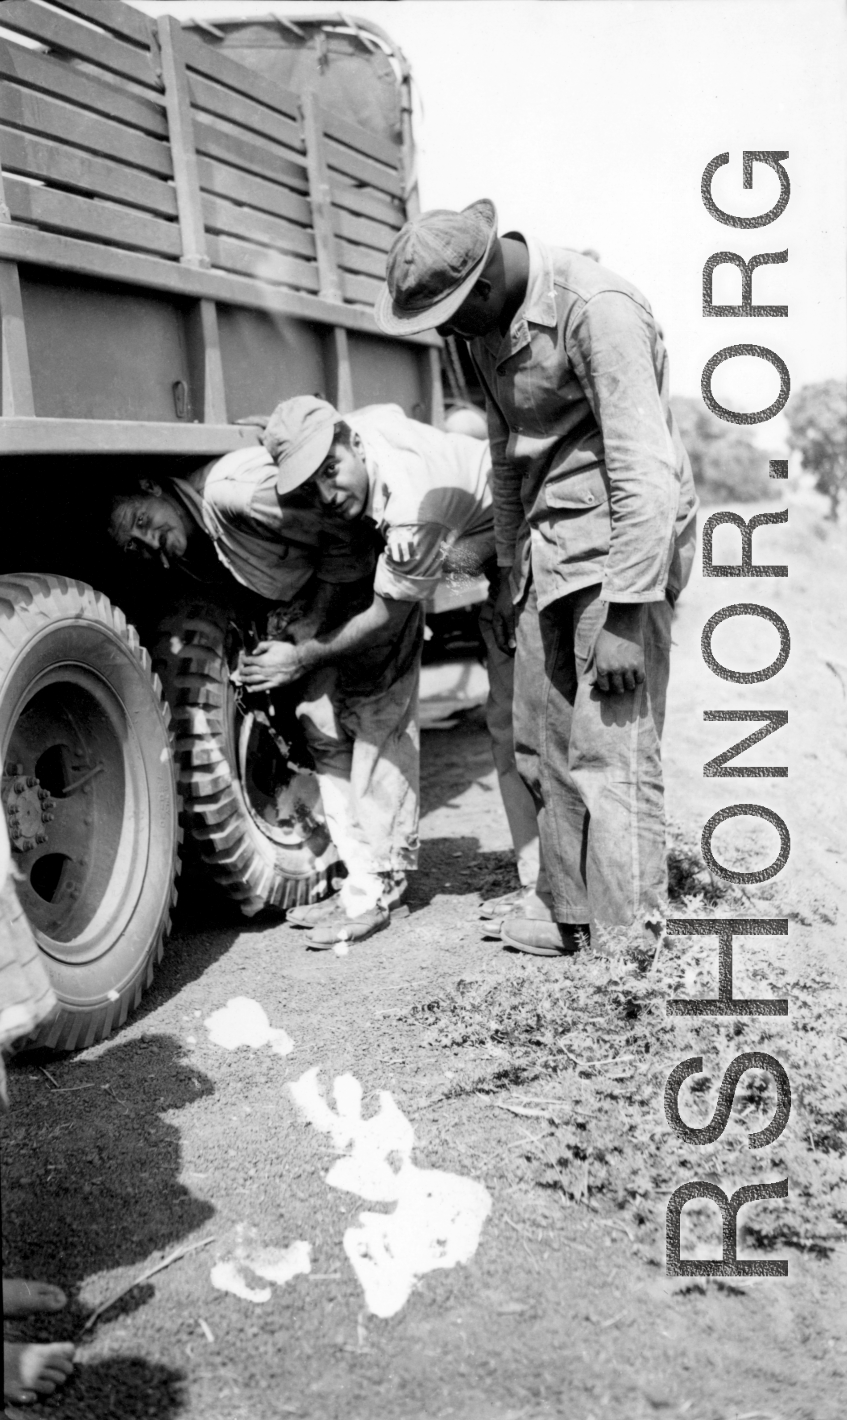 American servicemen--including an African-American serviceman--work on a truck along some road somewhere in the CBI during WWII.  From the collection of Wozniak, combat photographer for the 491st Bomb Squadron, in the CBI.